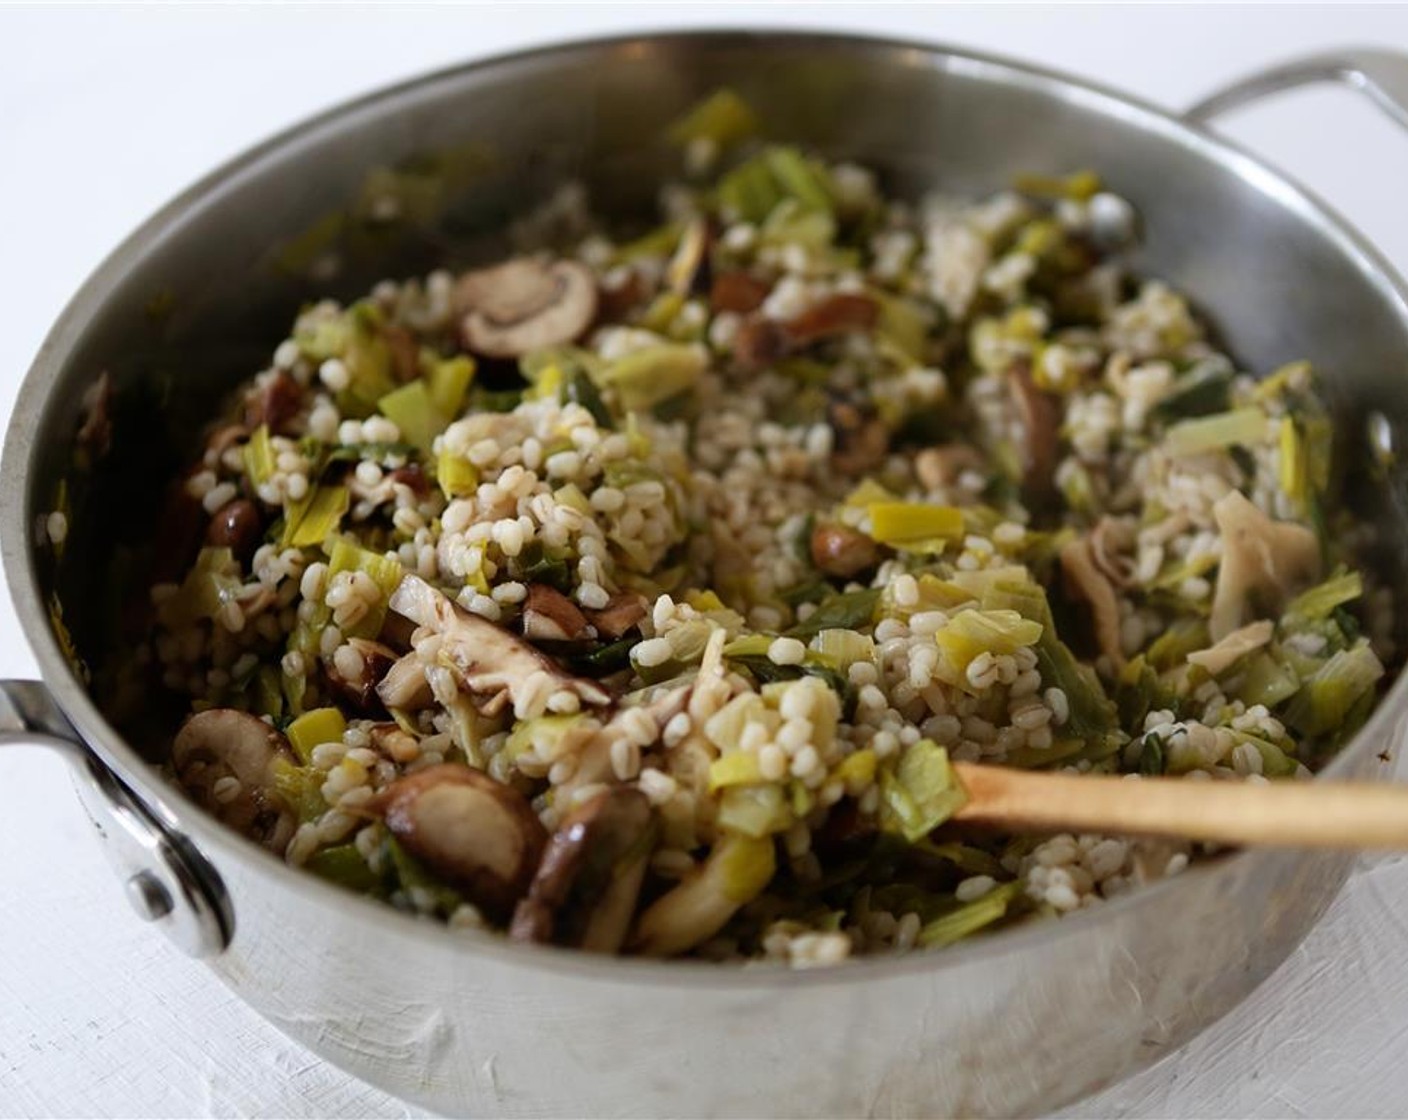 step 9 Once the mixed mushrooms and leeks have cooked, over medium-high heat, add cooked barley and lemon-butter mixture to pan. Cook 2-3 minutes, while stirring, to thoroughly incorporate. Remove pan from heat, discard fresh thyme.